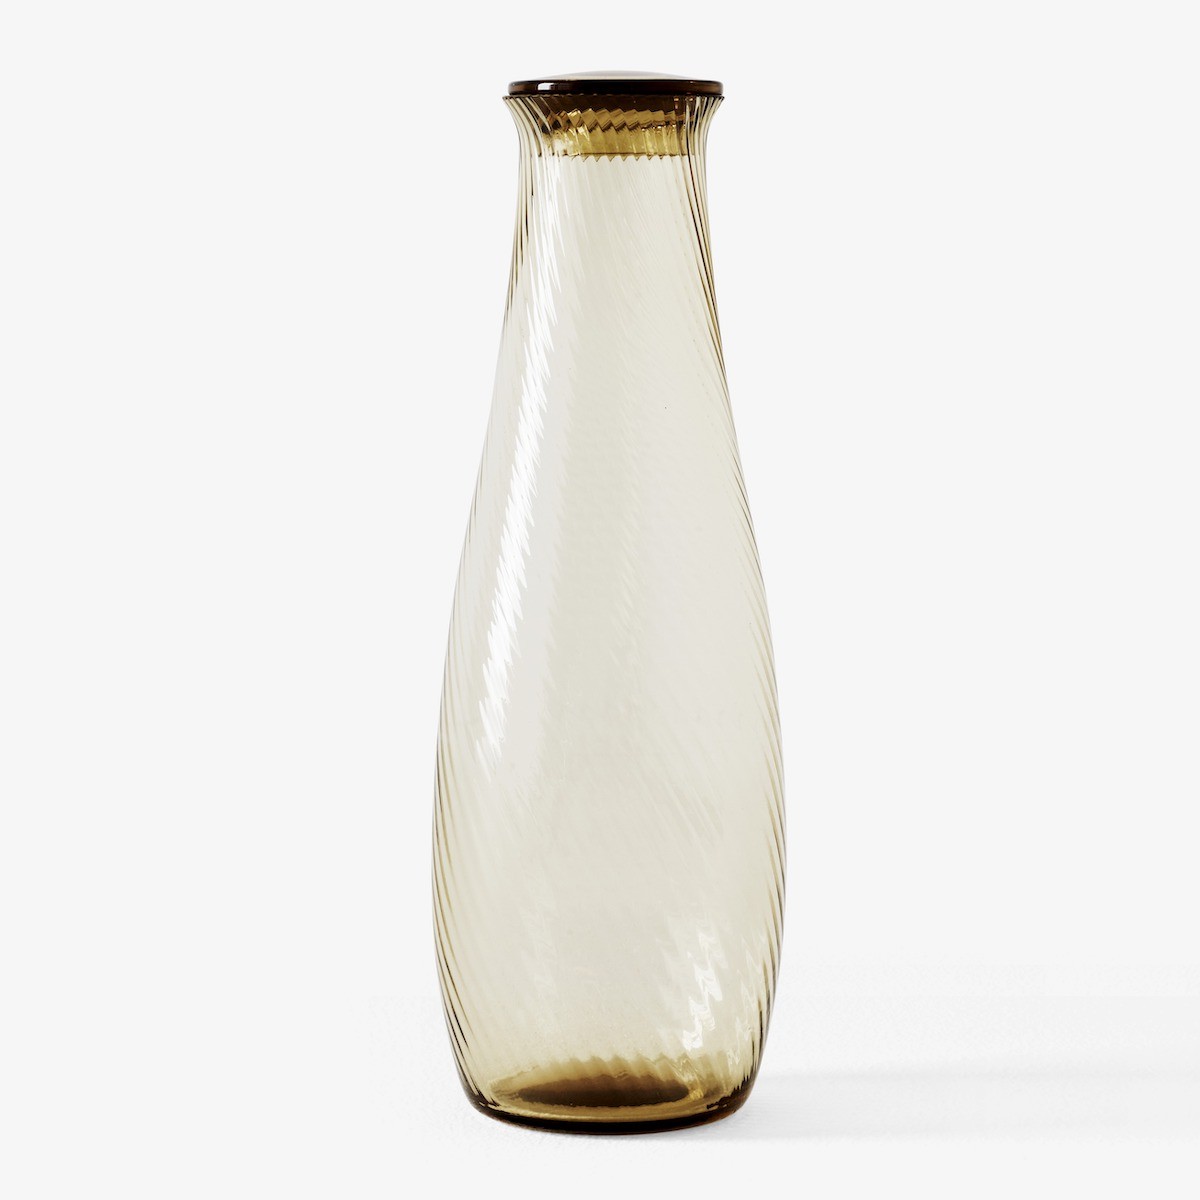 Carafe Collect 1.2l Amber – SC63